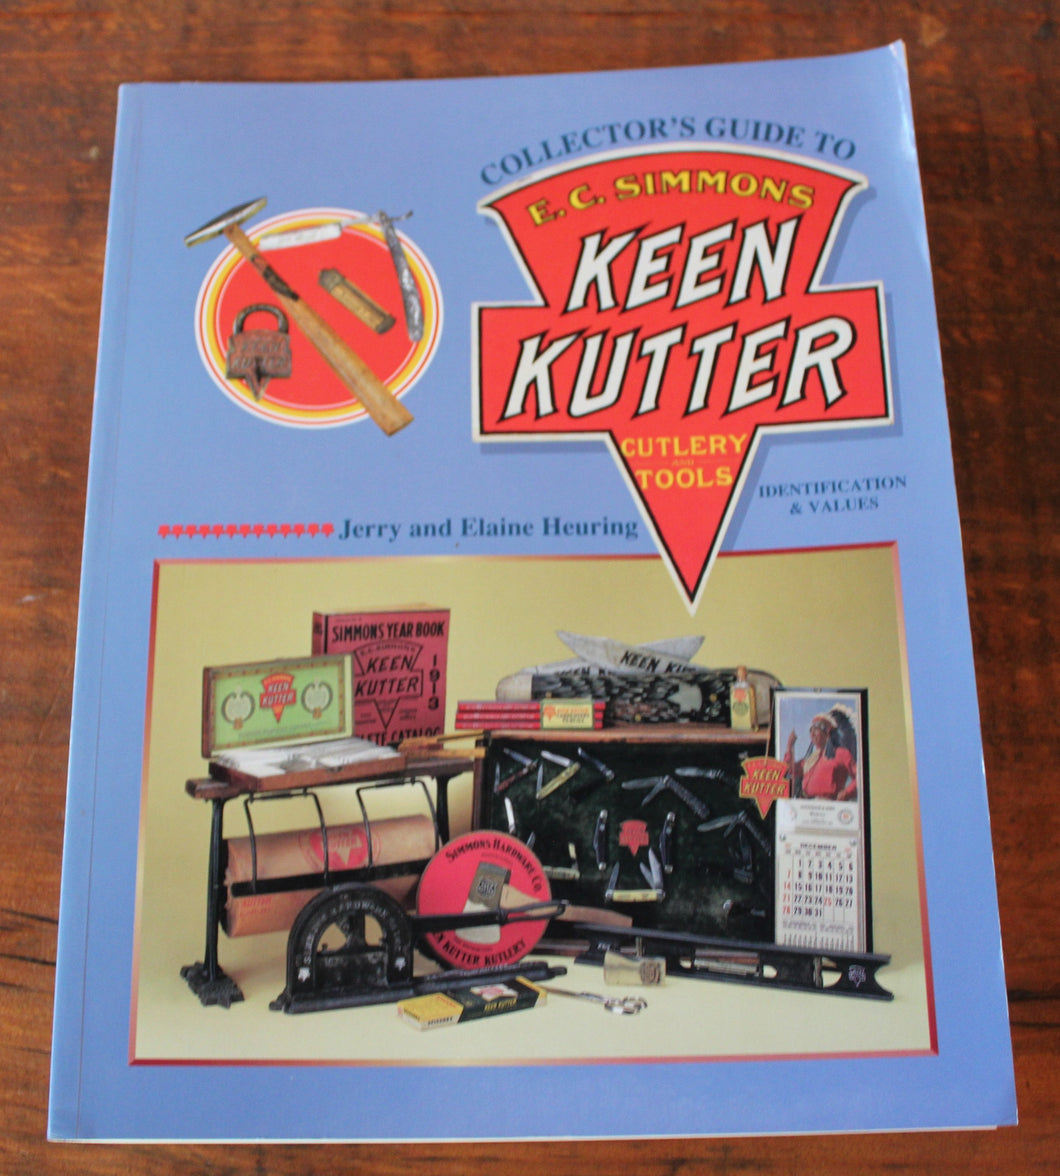 COLLECTOR'S GUIDE TO E. C. SIMMONS KEEN KUTTER: CUTLERY By Jerry Heuring